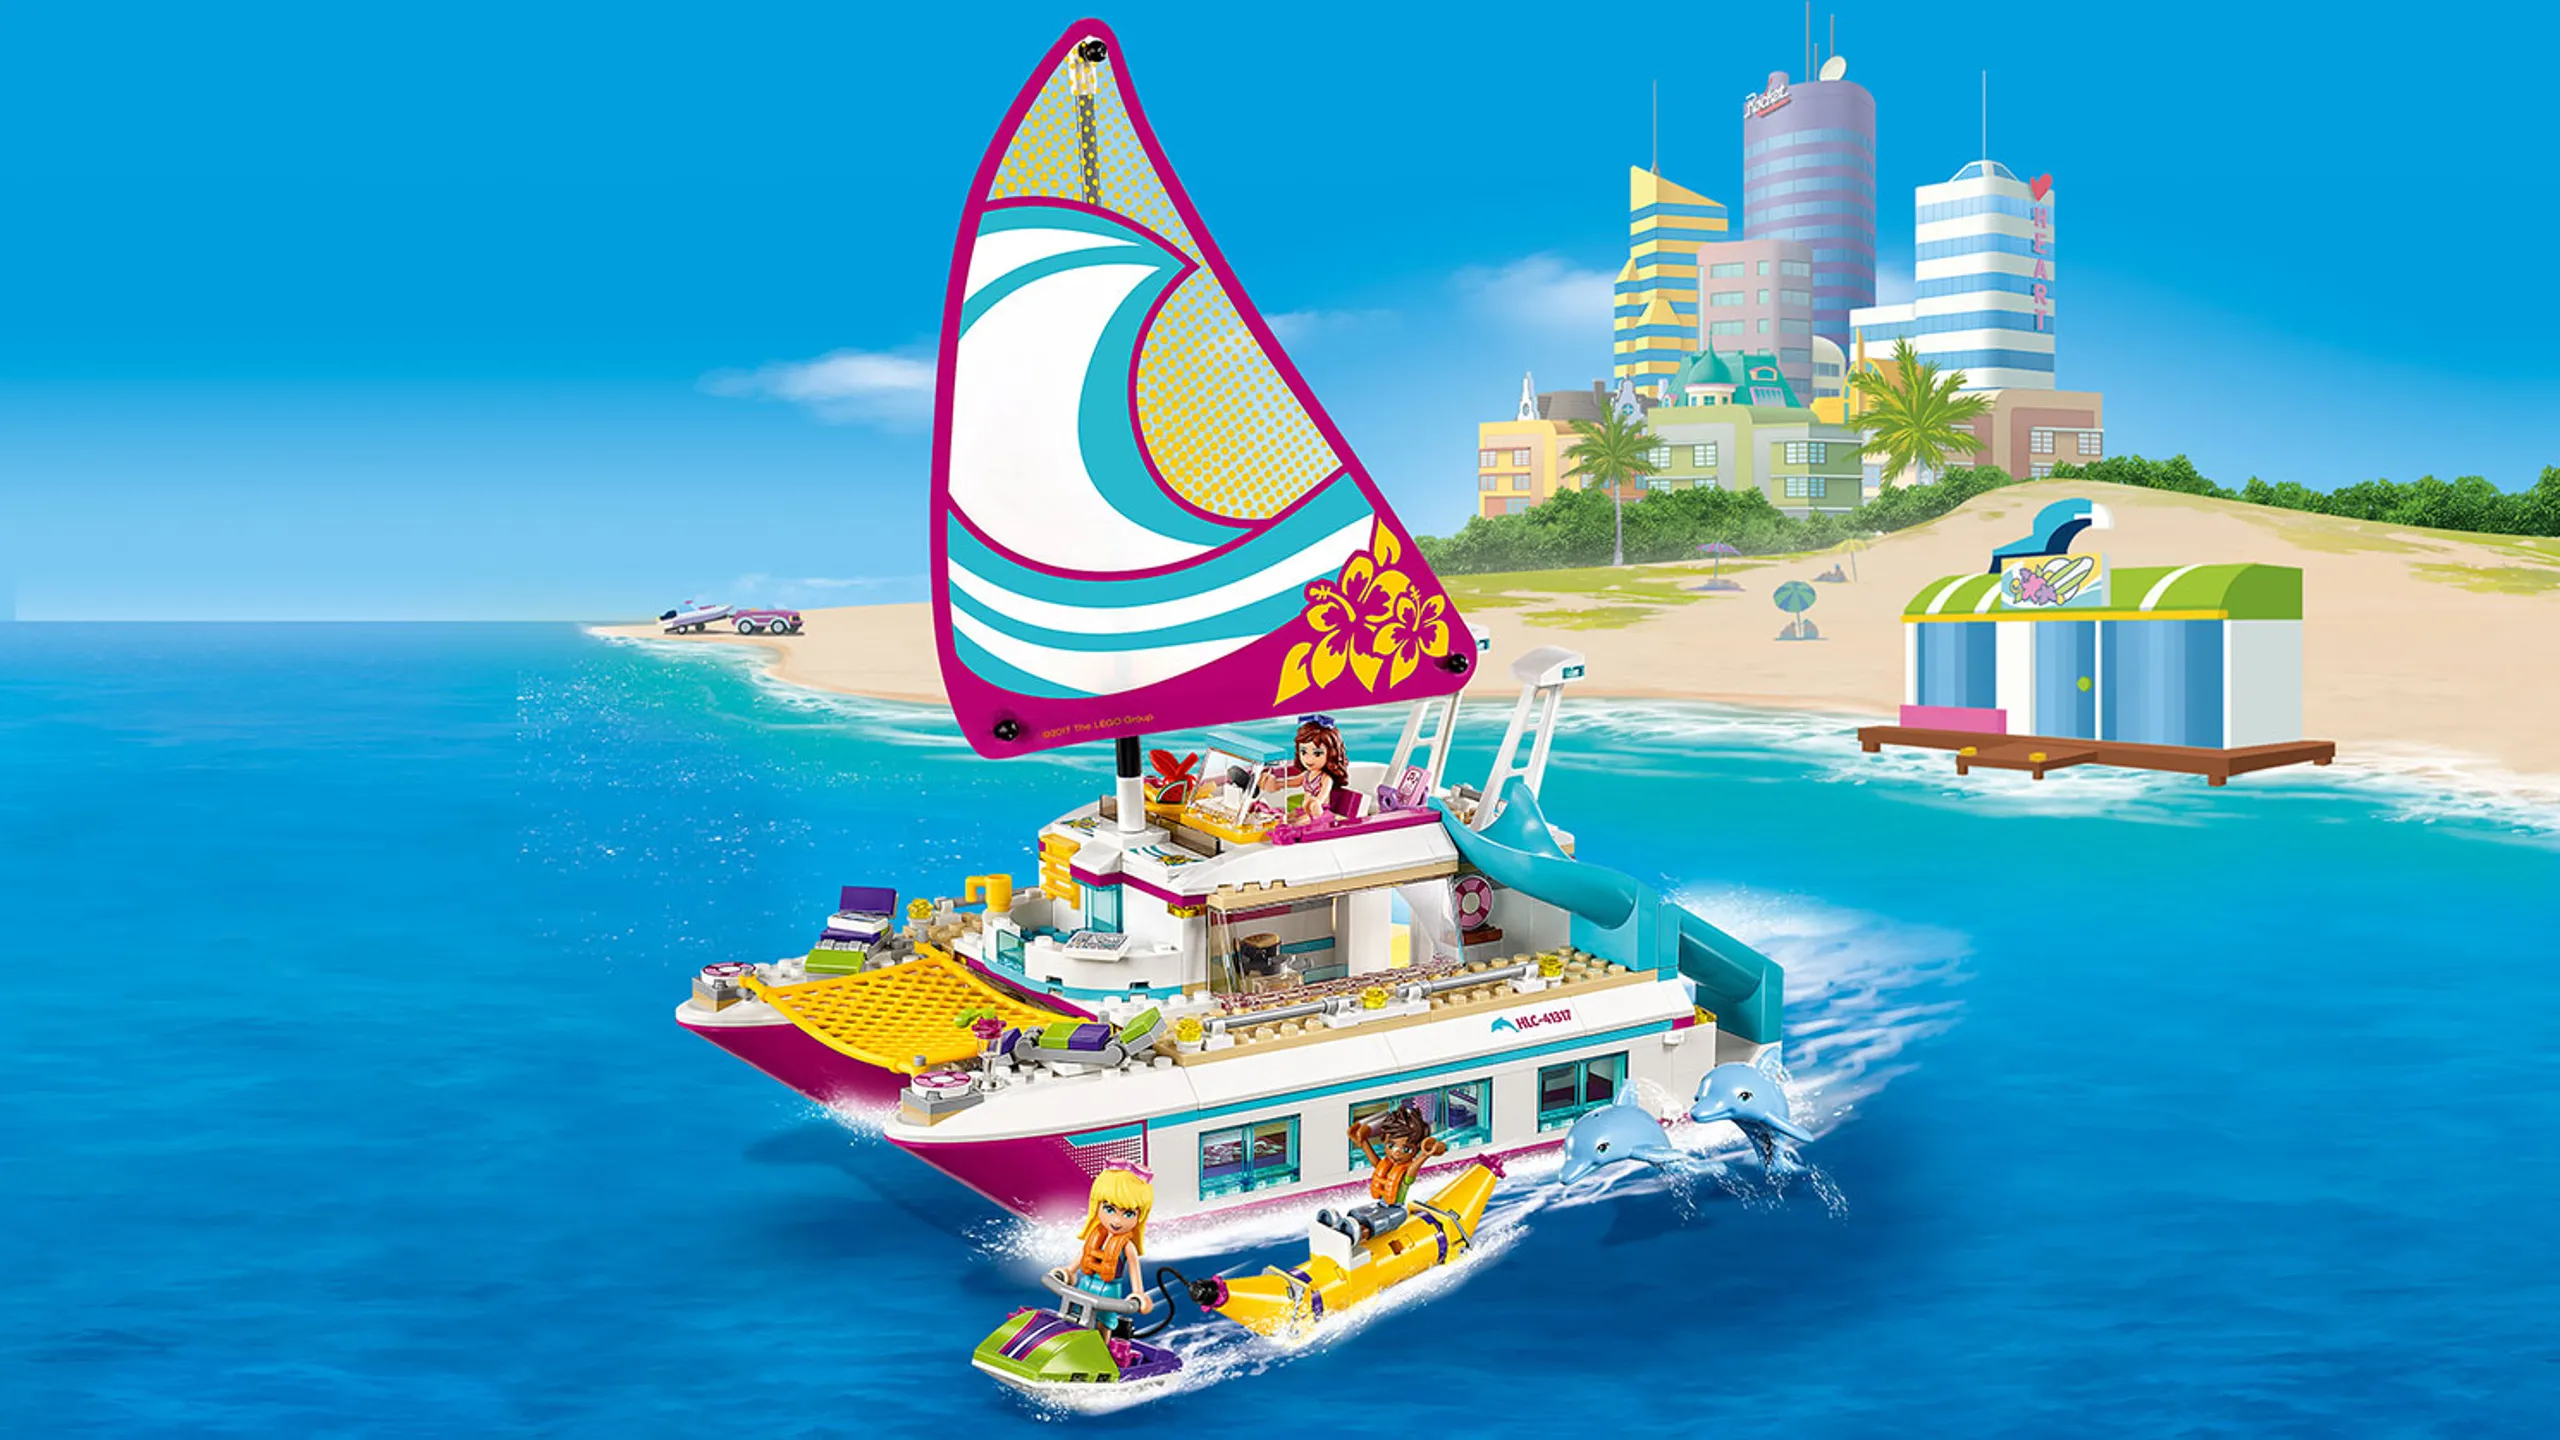 LEGO Friends - 41317 Sunshine Catamaran - Cruise at sea on the luxurious catamaran and grab the water scooter to get real close to the dolphins!